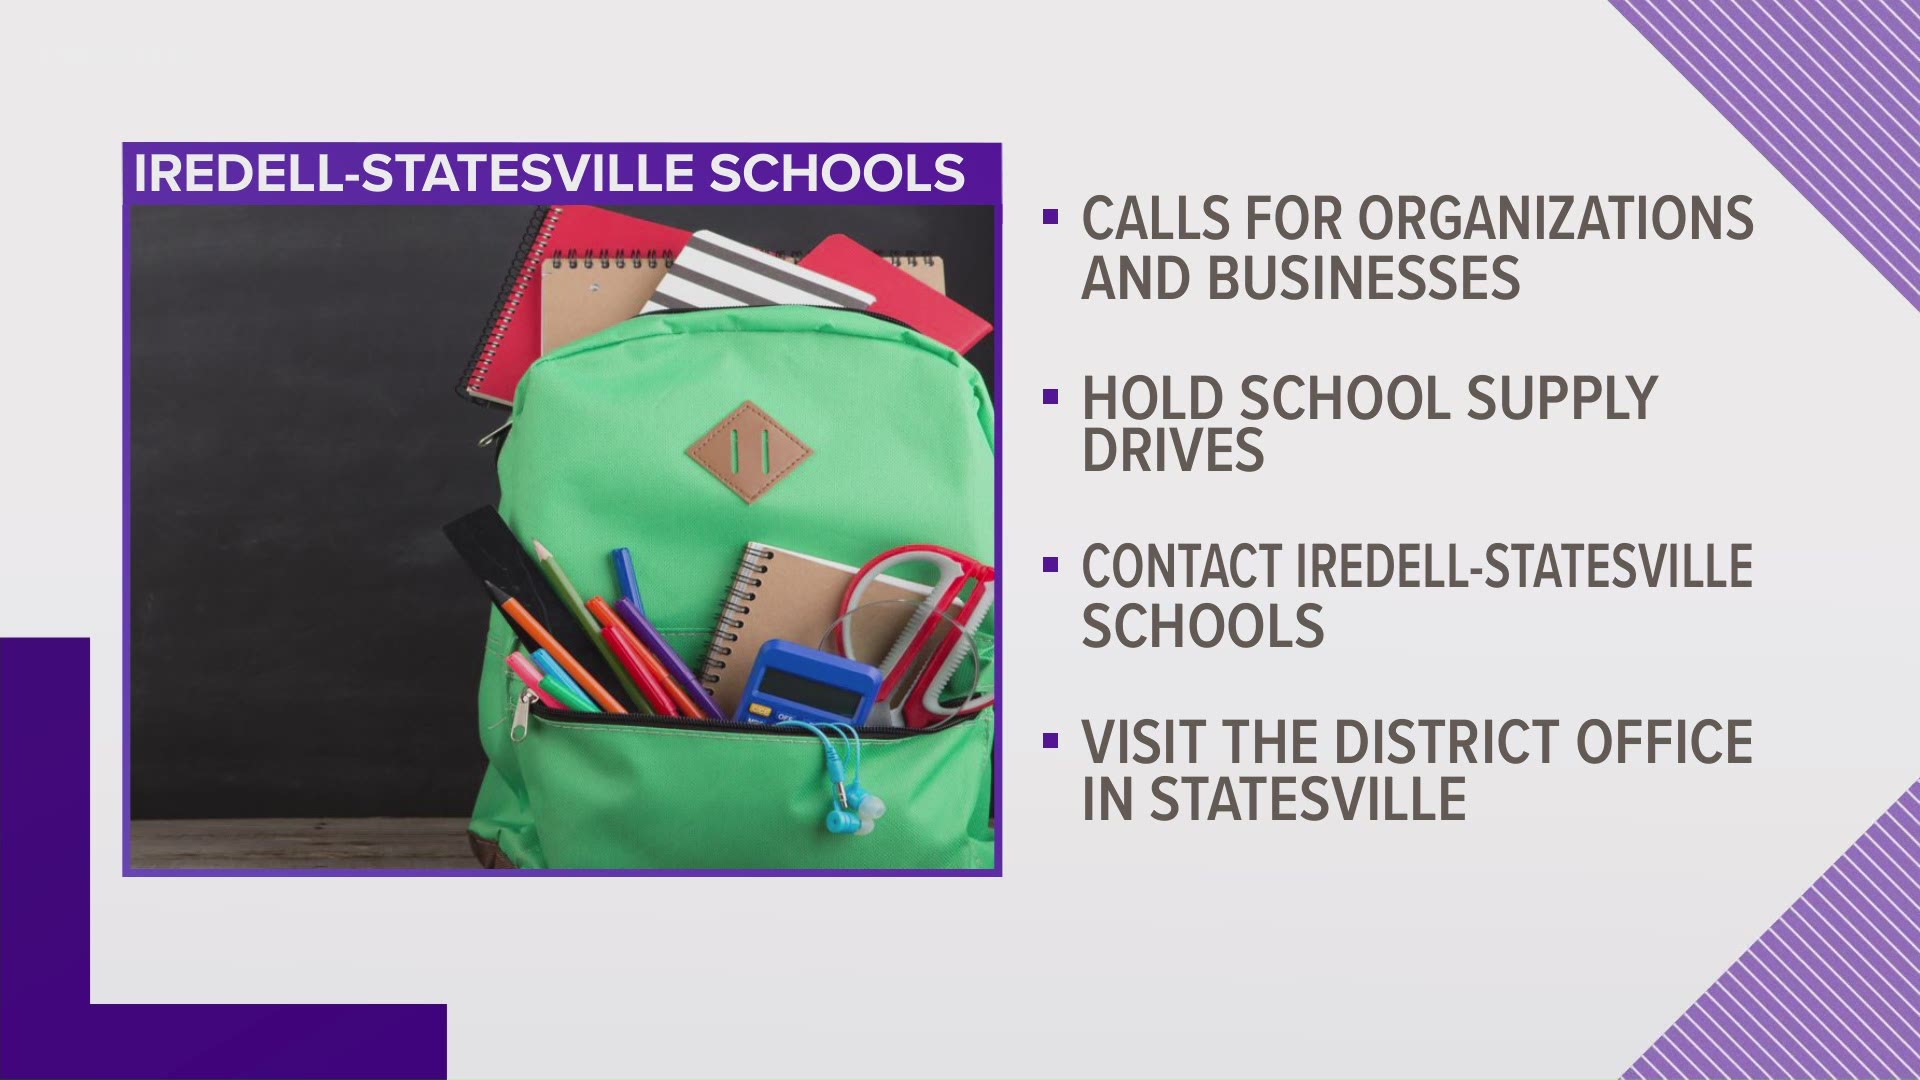 Here's how you can help gets supplies to students in need for the upcoming school year.